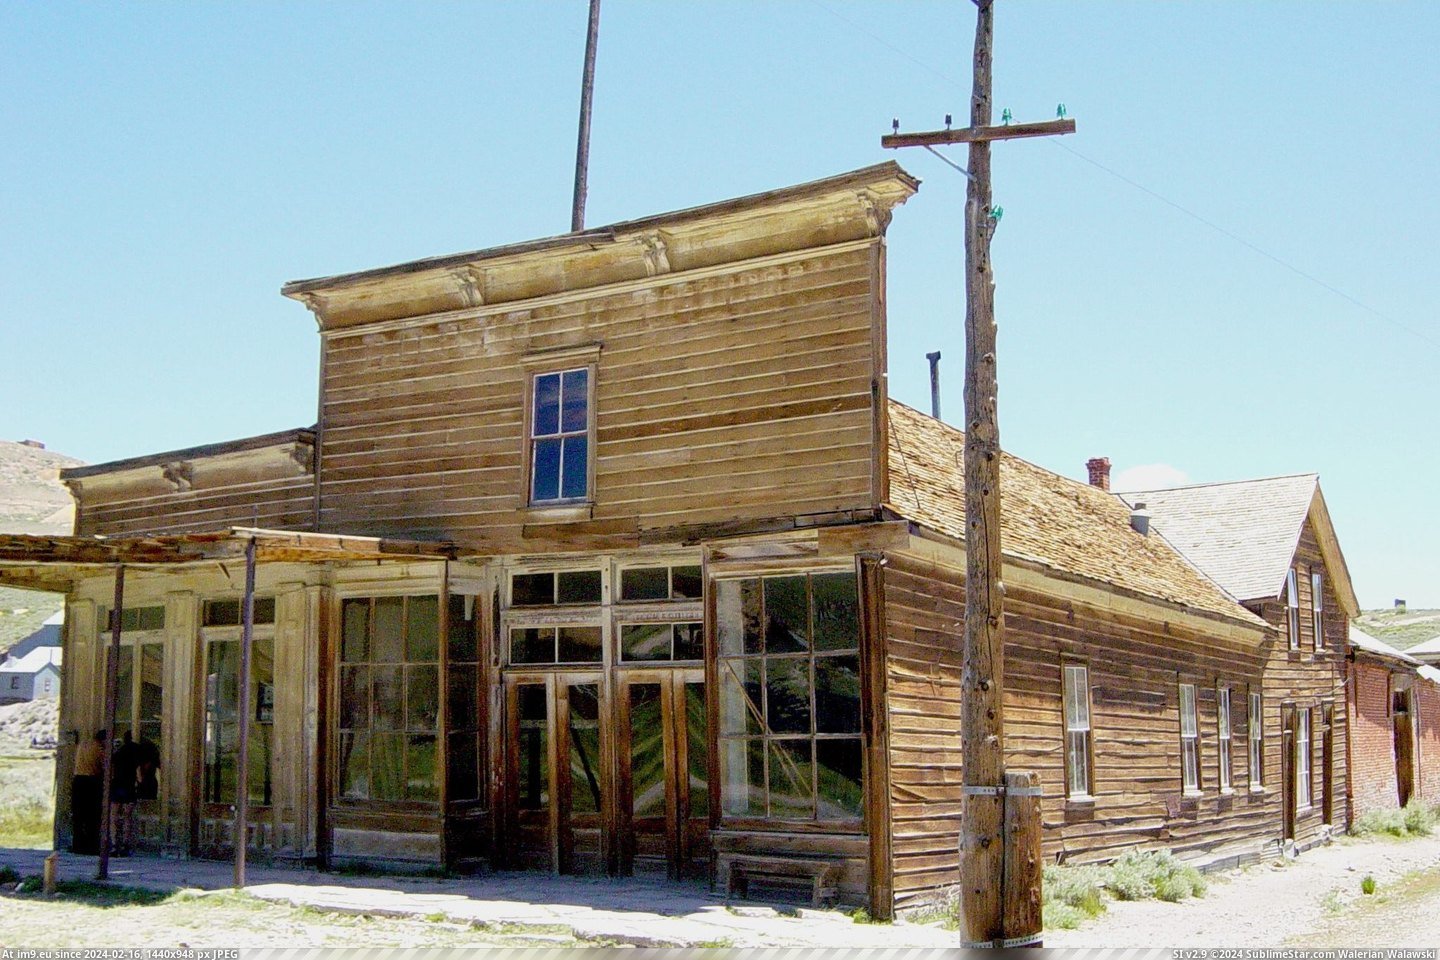 #California #Hotel #Hollis #Wheaton #Store #Bodie Wheaton And Hollis Hotel And Bodie Store In Bodie, California Pic. (Изображение из альбом Bodie - a ghost town in Eastern California))